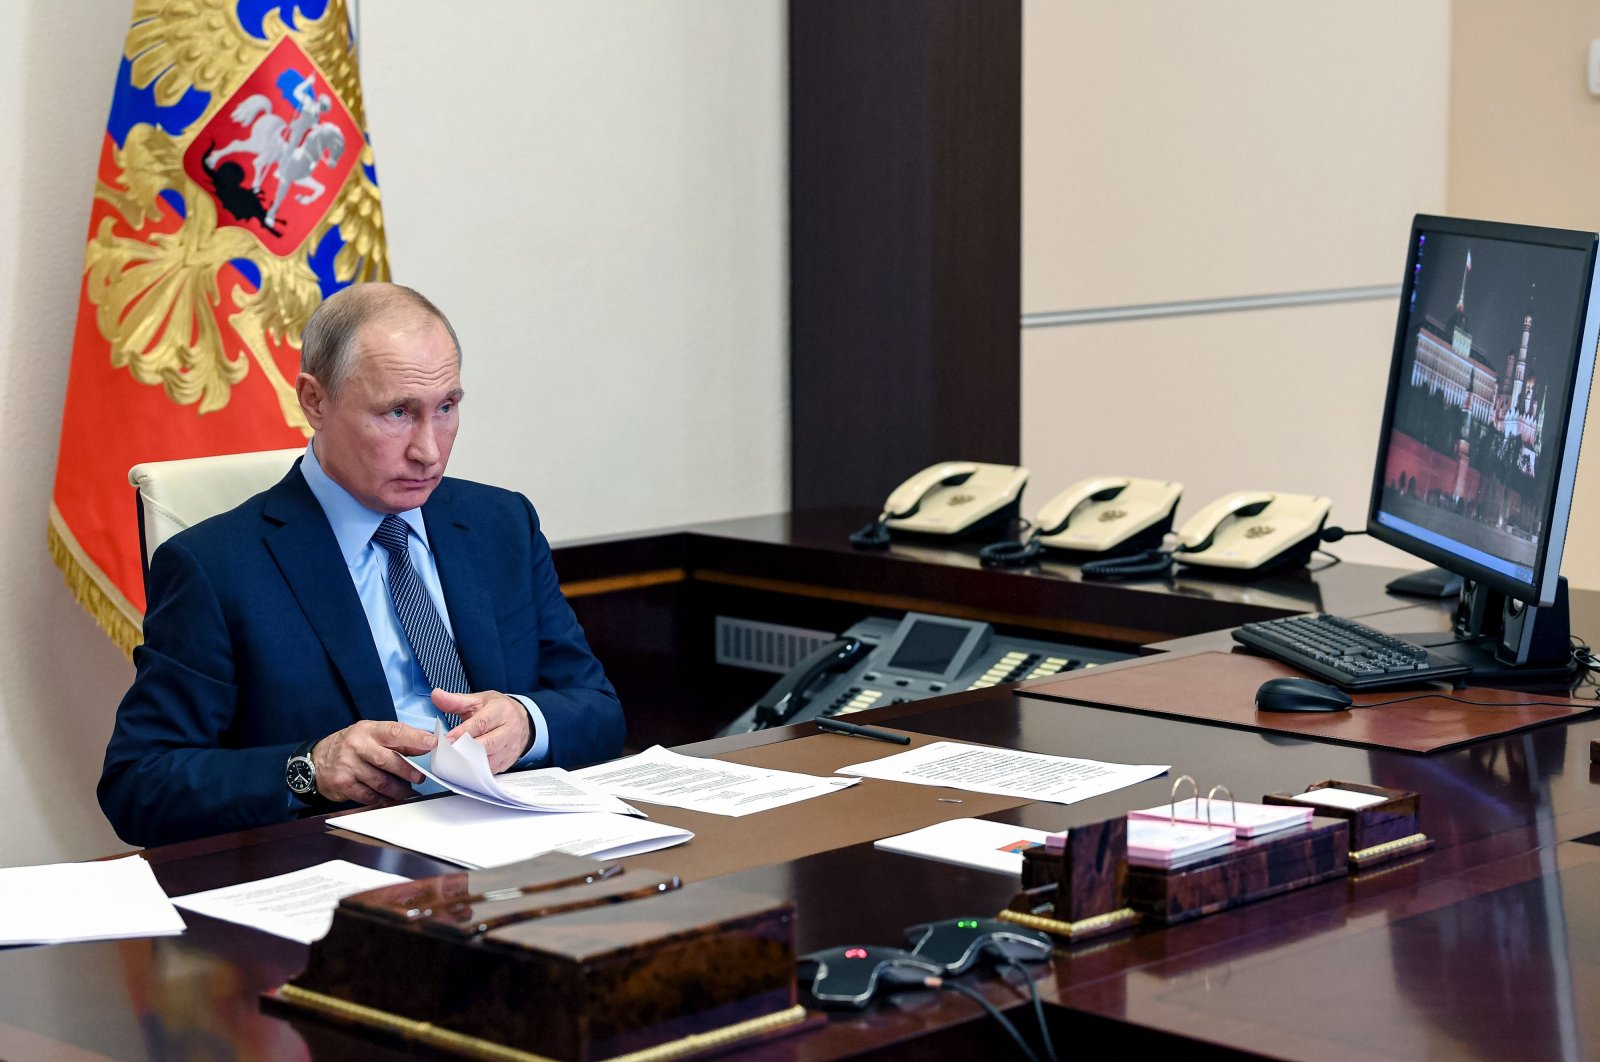 Russian President Vladimir Putin attends a meeting with health workers via videoconference at the Novo-Ogaryovo state residence outside Moscow, Russia, June 20, 2020. (AFP Photo)